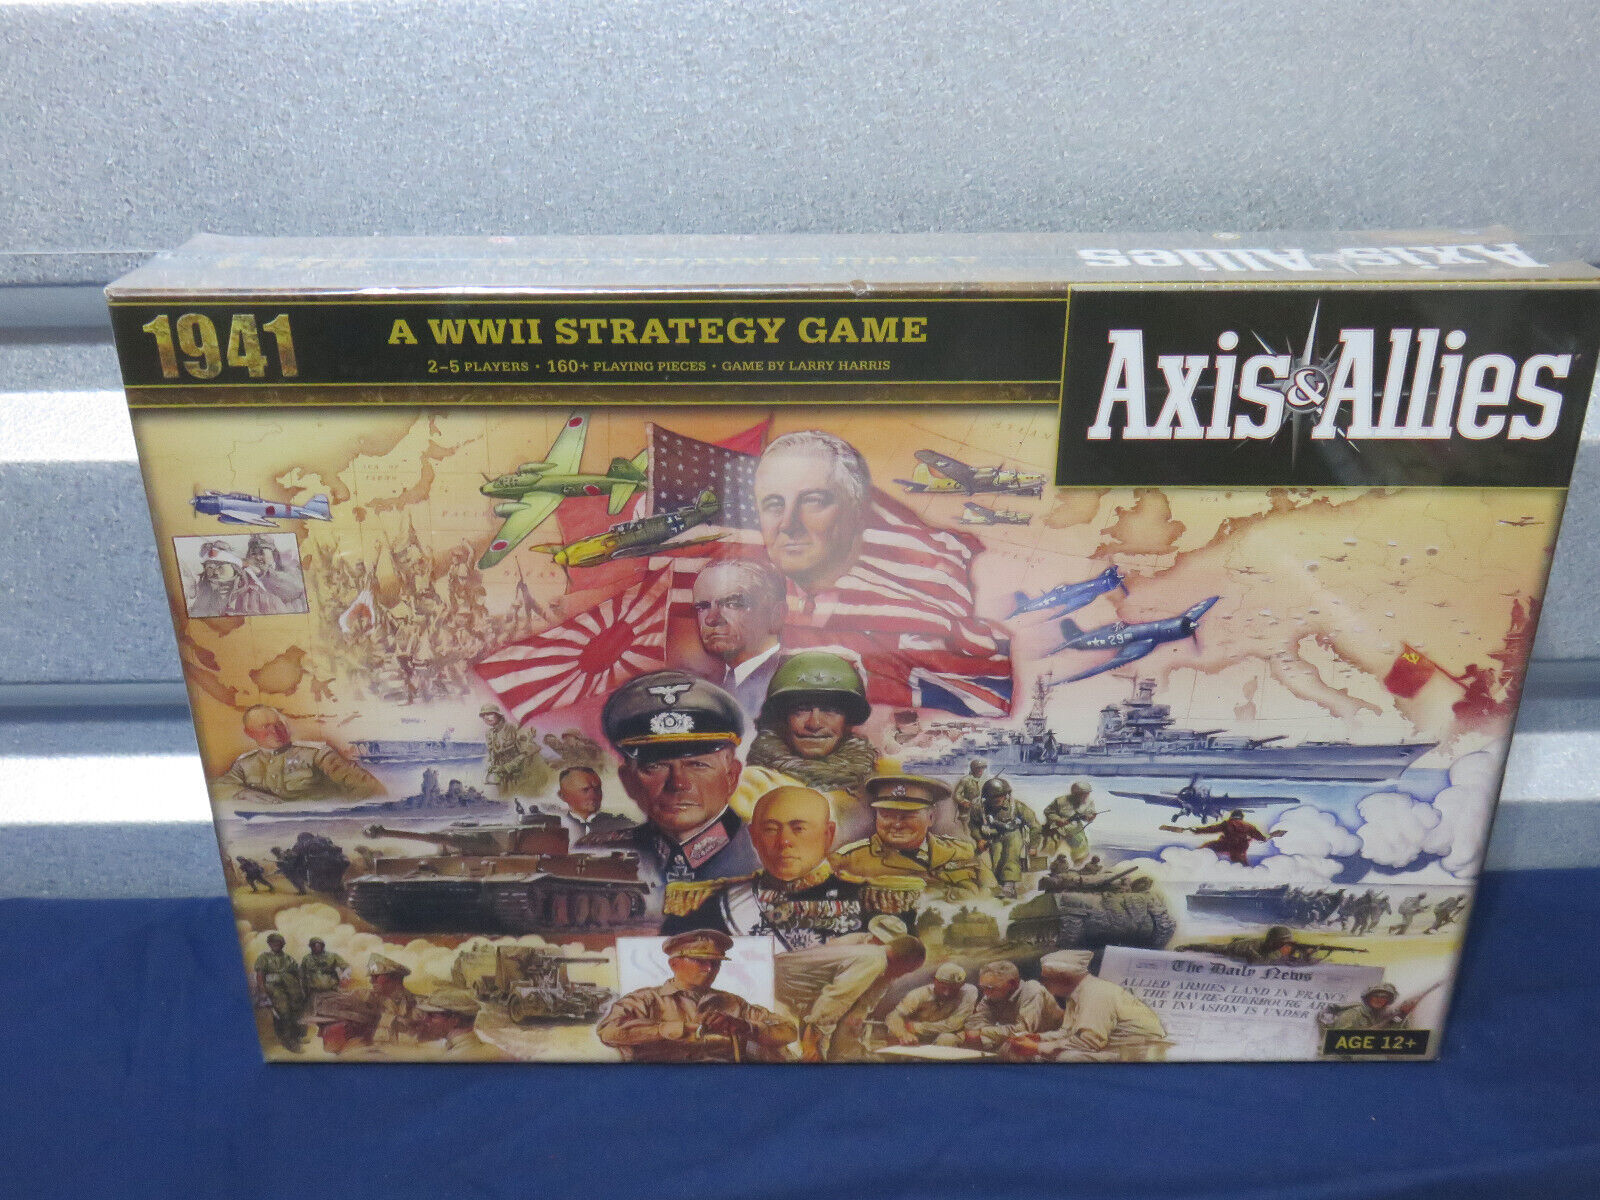 Primary image for Axis and Allies 1941 WWII Strategy Board Game New Sealed (B11)